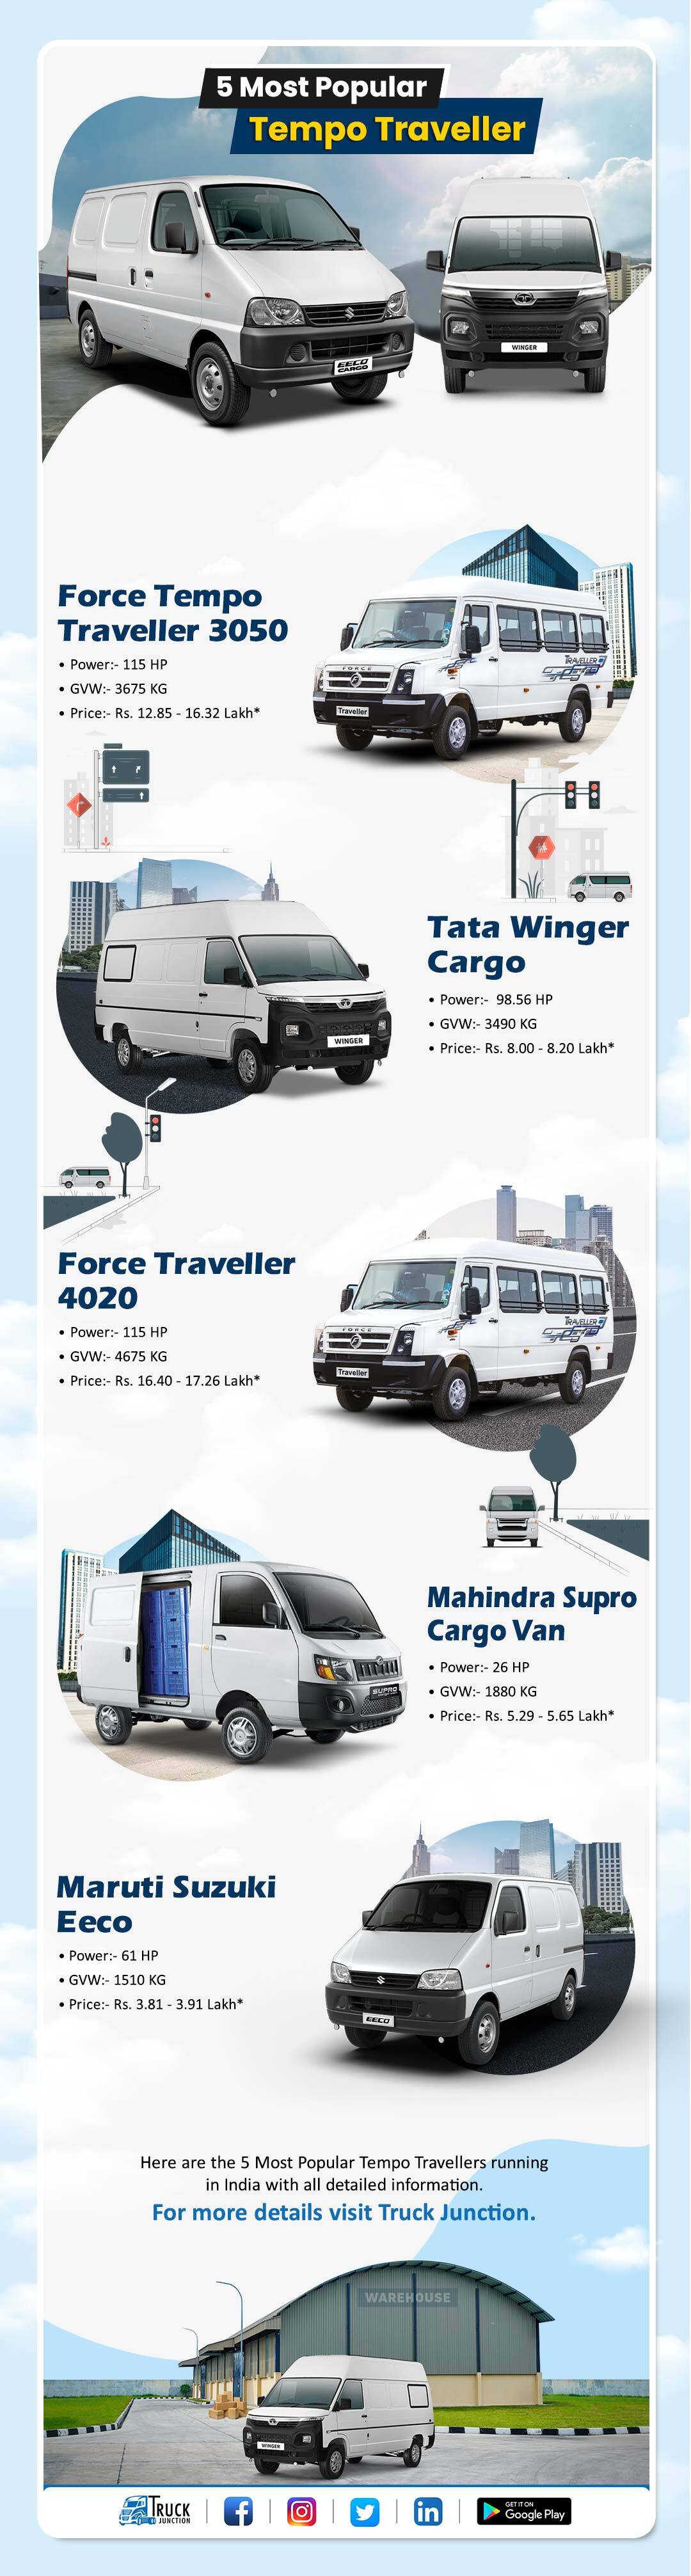 5 Most Popular Tempo Traveller Infographic 